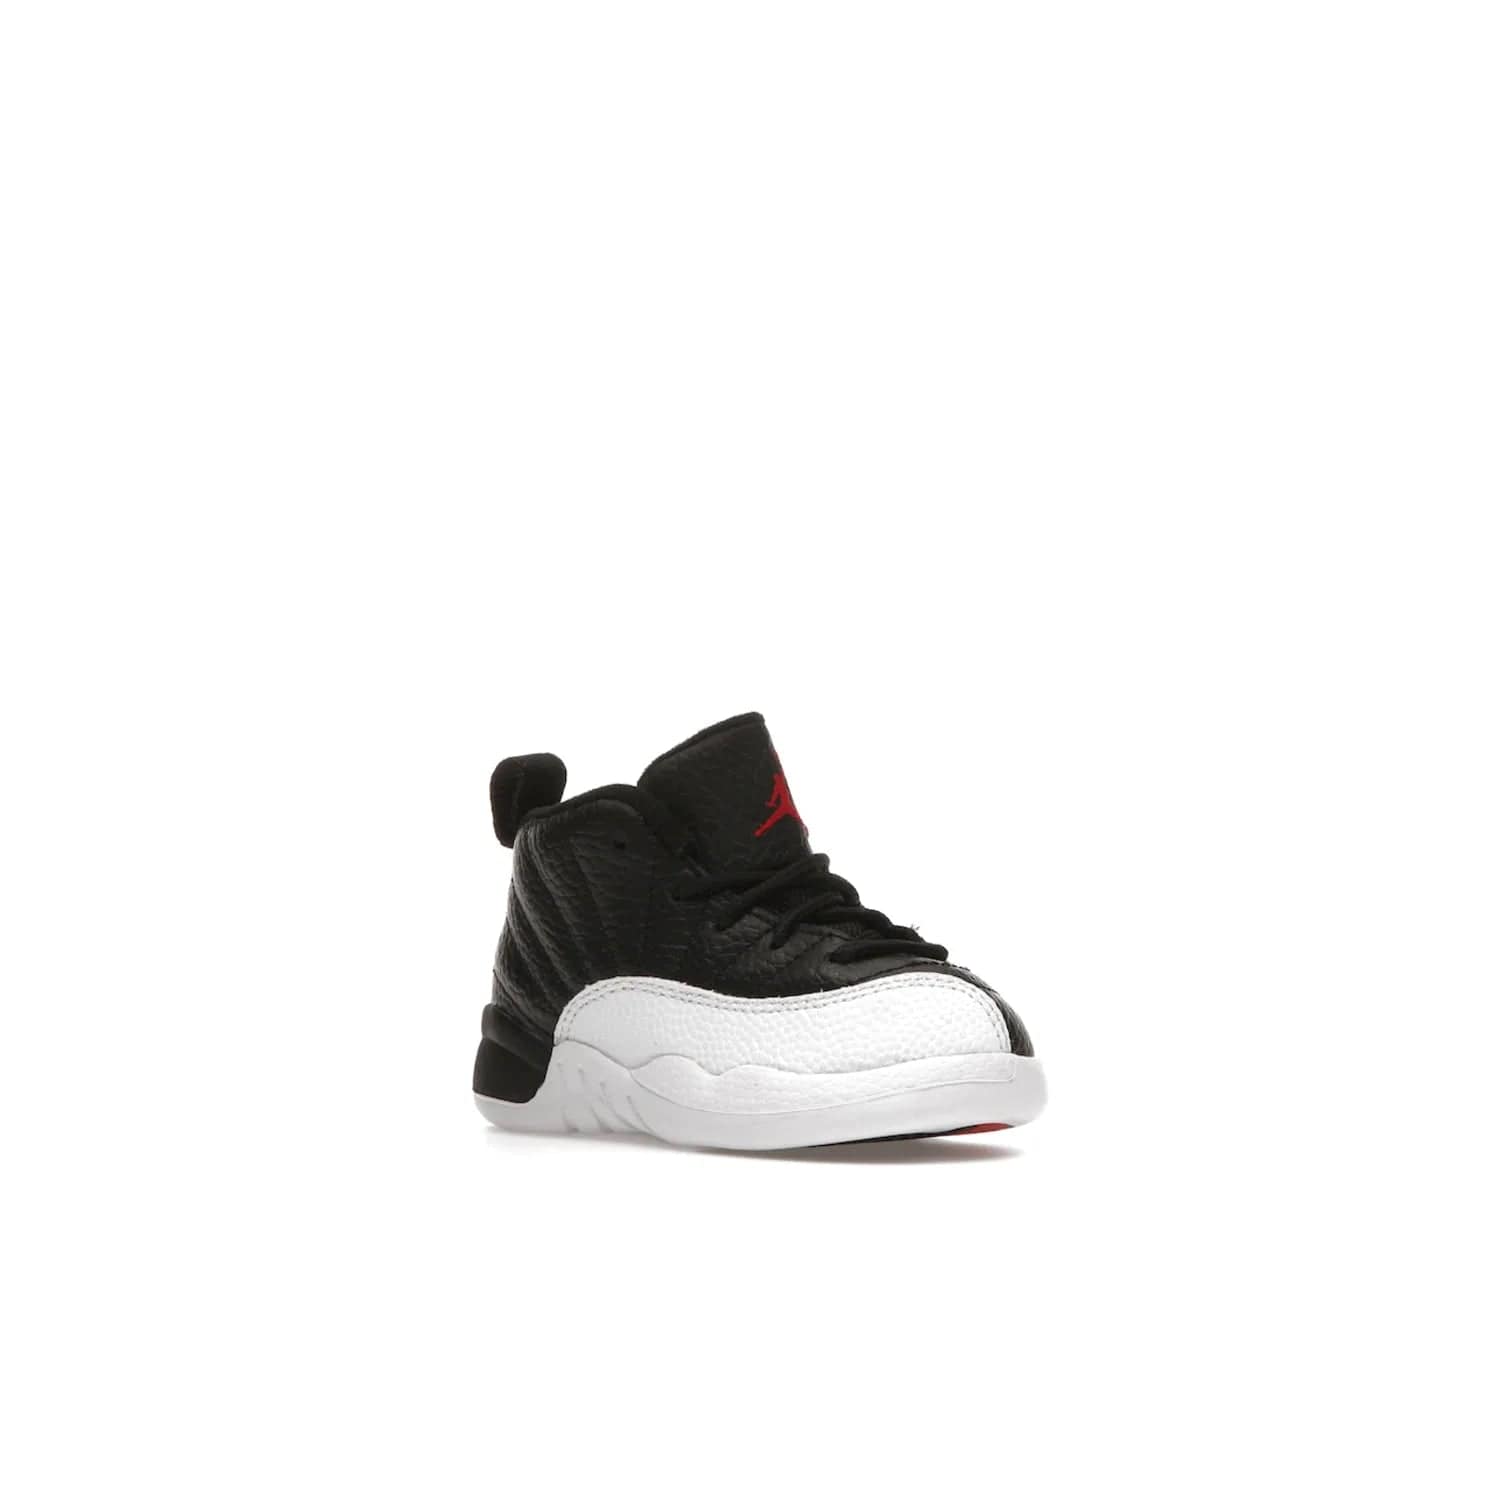 Jordan 12 Retro Playoffs (2022) (TD) - Image 5 - Only at www.BallersClubKickz.com - Stay stylish with the Air Jordan 12 Retro Playoffs 2022 (TD) toddler shoe. All-black upper with red and white accents plus subtle gold details. Bright white midsole and sole. Perfect for any outing or special event.